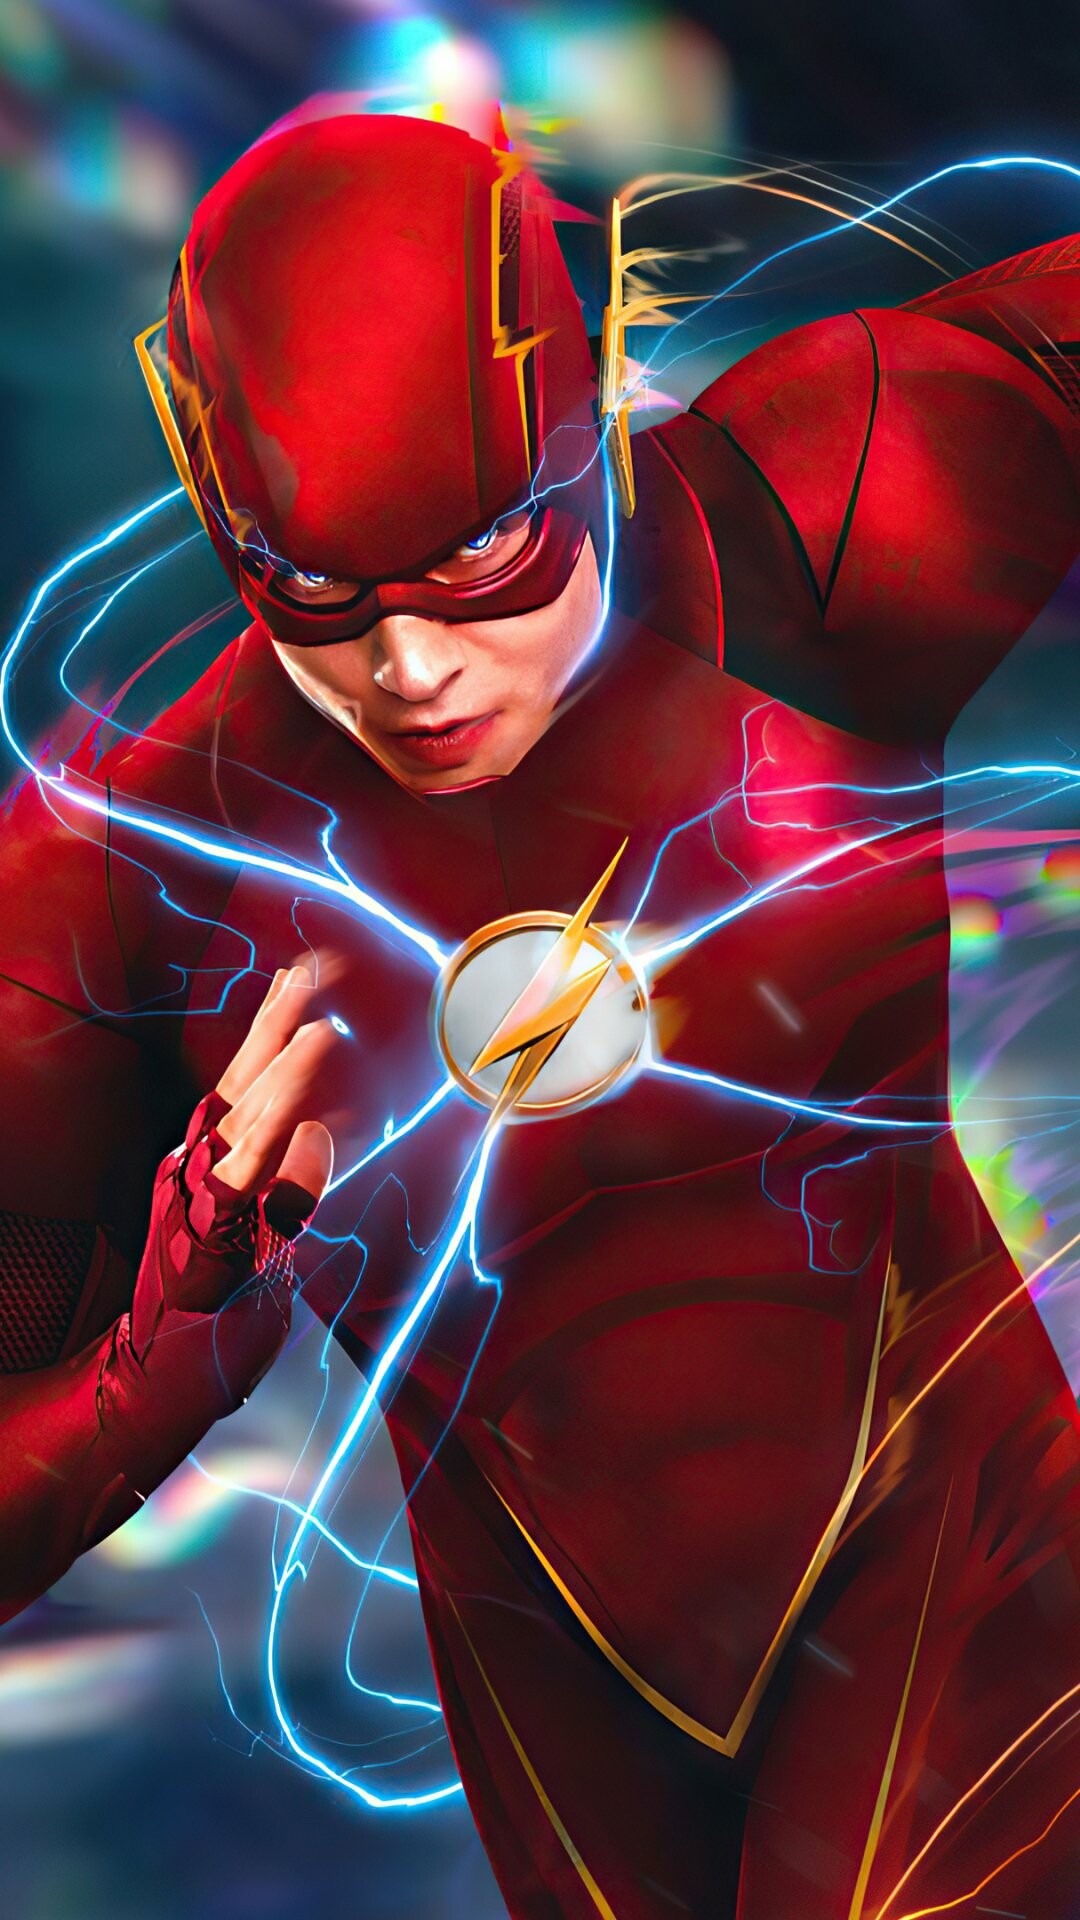 Flash (DC): Barry Allen gained super-human speed after the explosion of the S.T.A.R. Labs' particle accelerator. 1080x1920 Full HD Background.